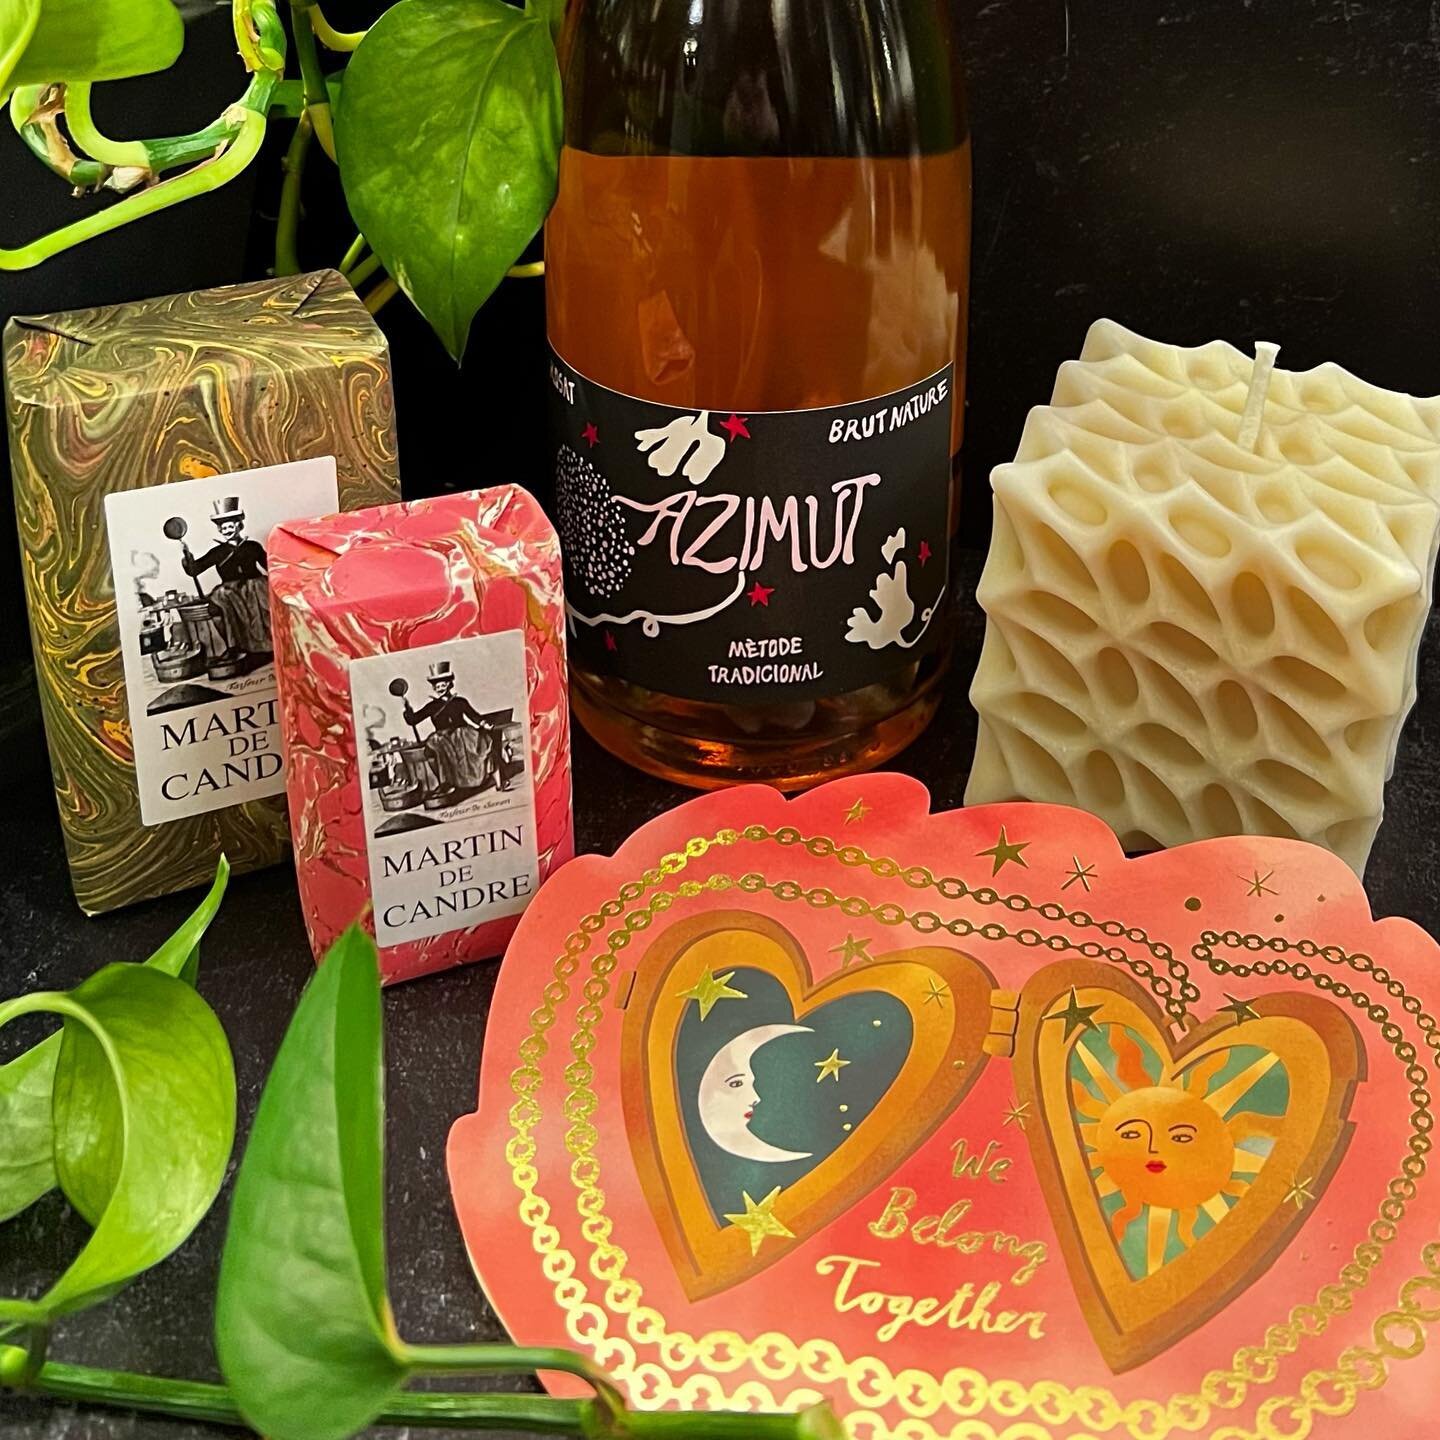 Pick up some gorgeous @martindecandre soaps from our neighbor @orcaspaley, then come up to Ghost and pair them with @azimutwines Sparkling Brut Rose, a delightful card by @redcapcards and a beautiful beeswax candle by @nlumec - you&rsquo;re all set! 